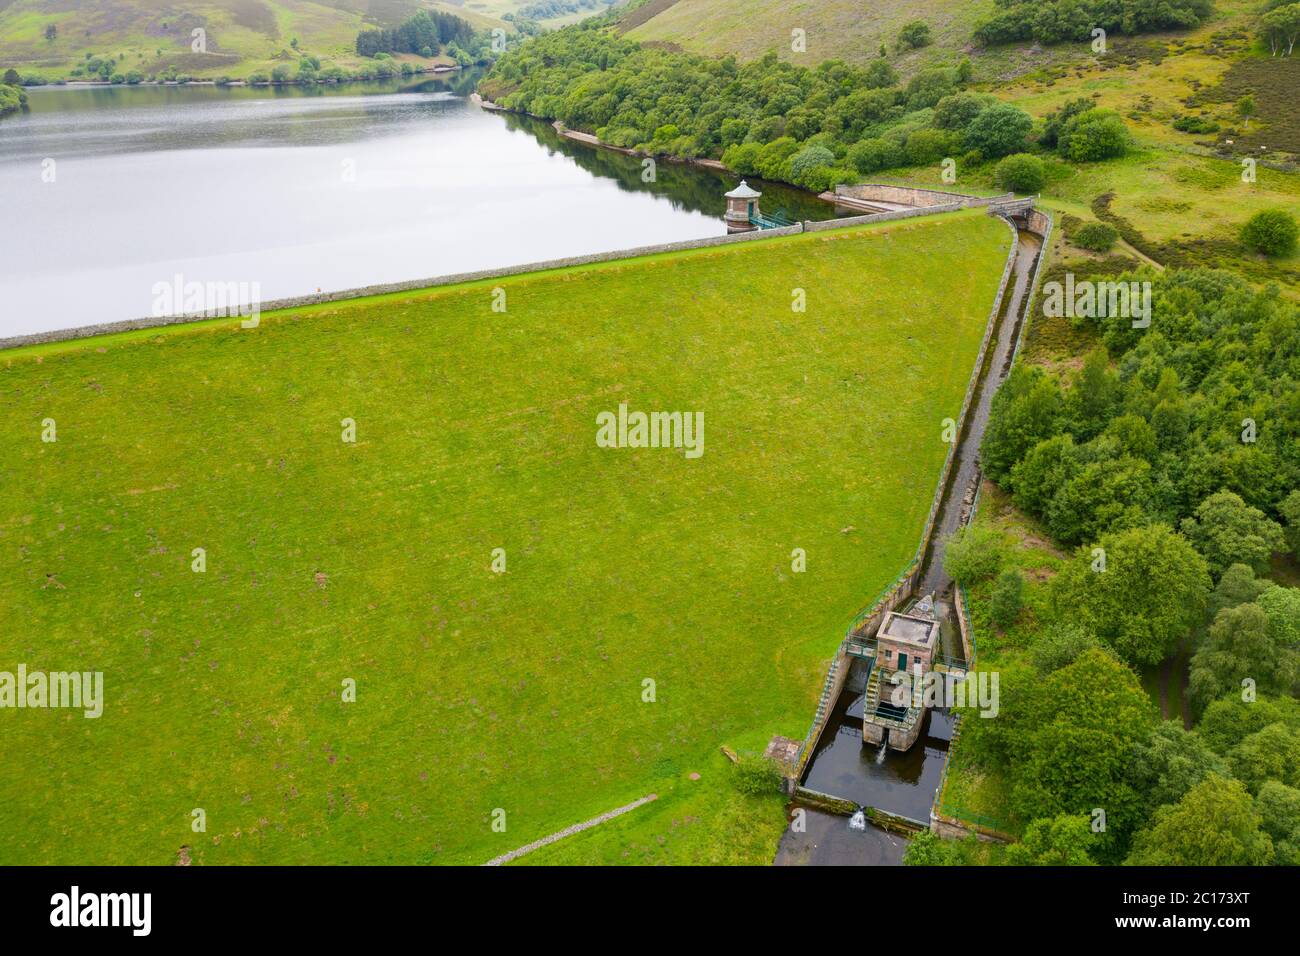 Aerial view of spillway at Hopes reservoir in East Lothian. Scotland, UK. Stock Photo